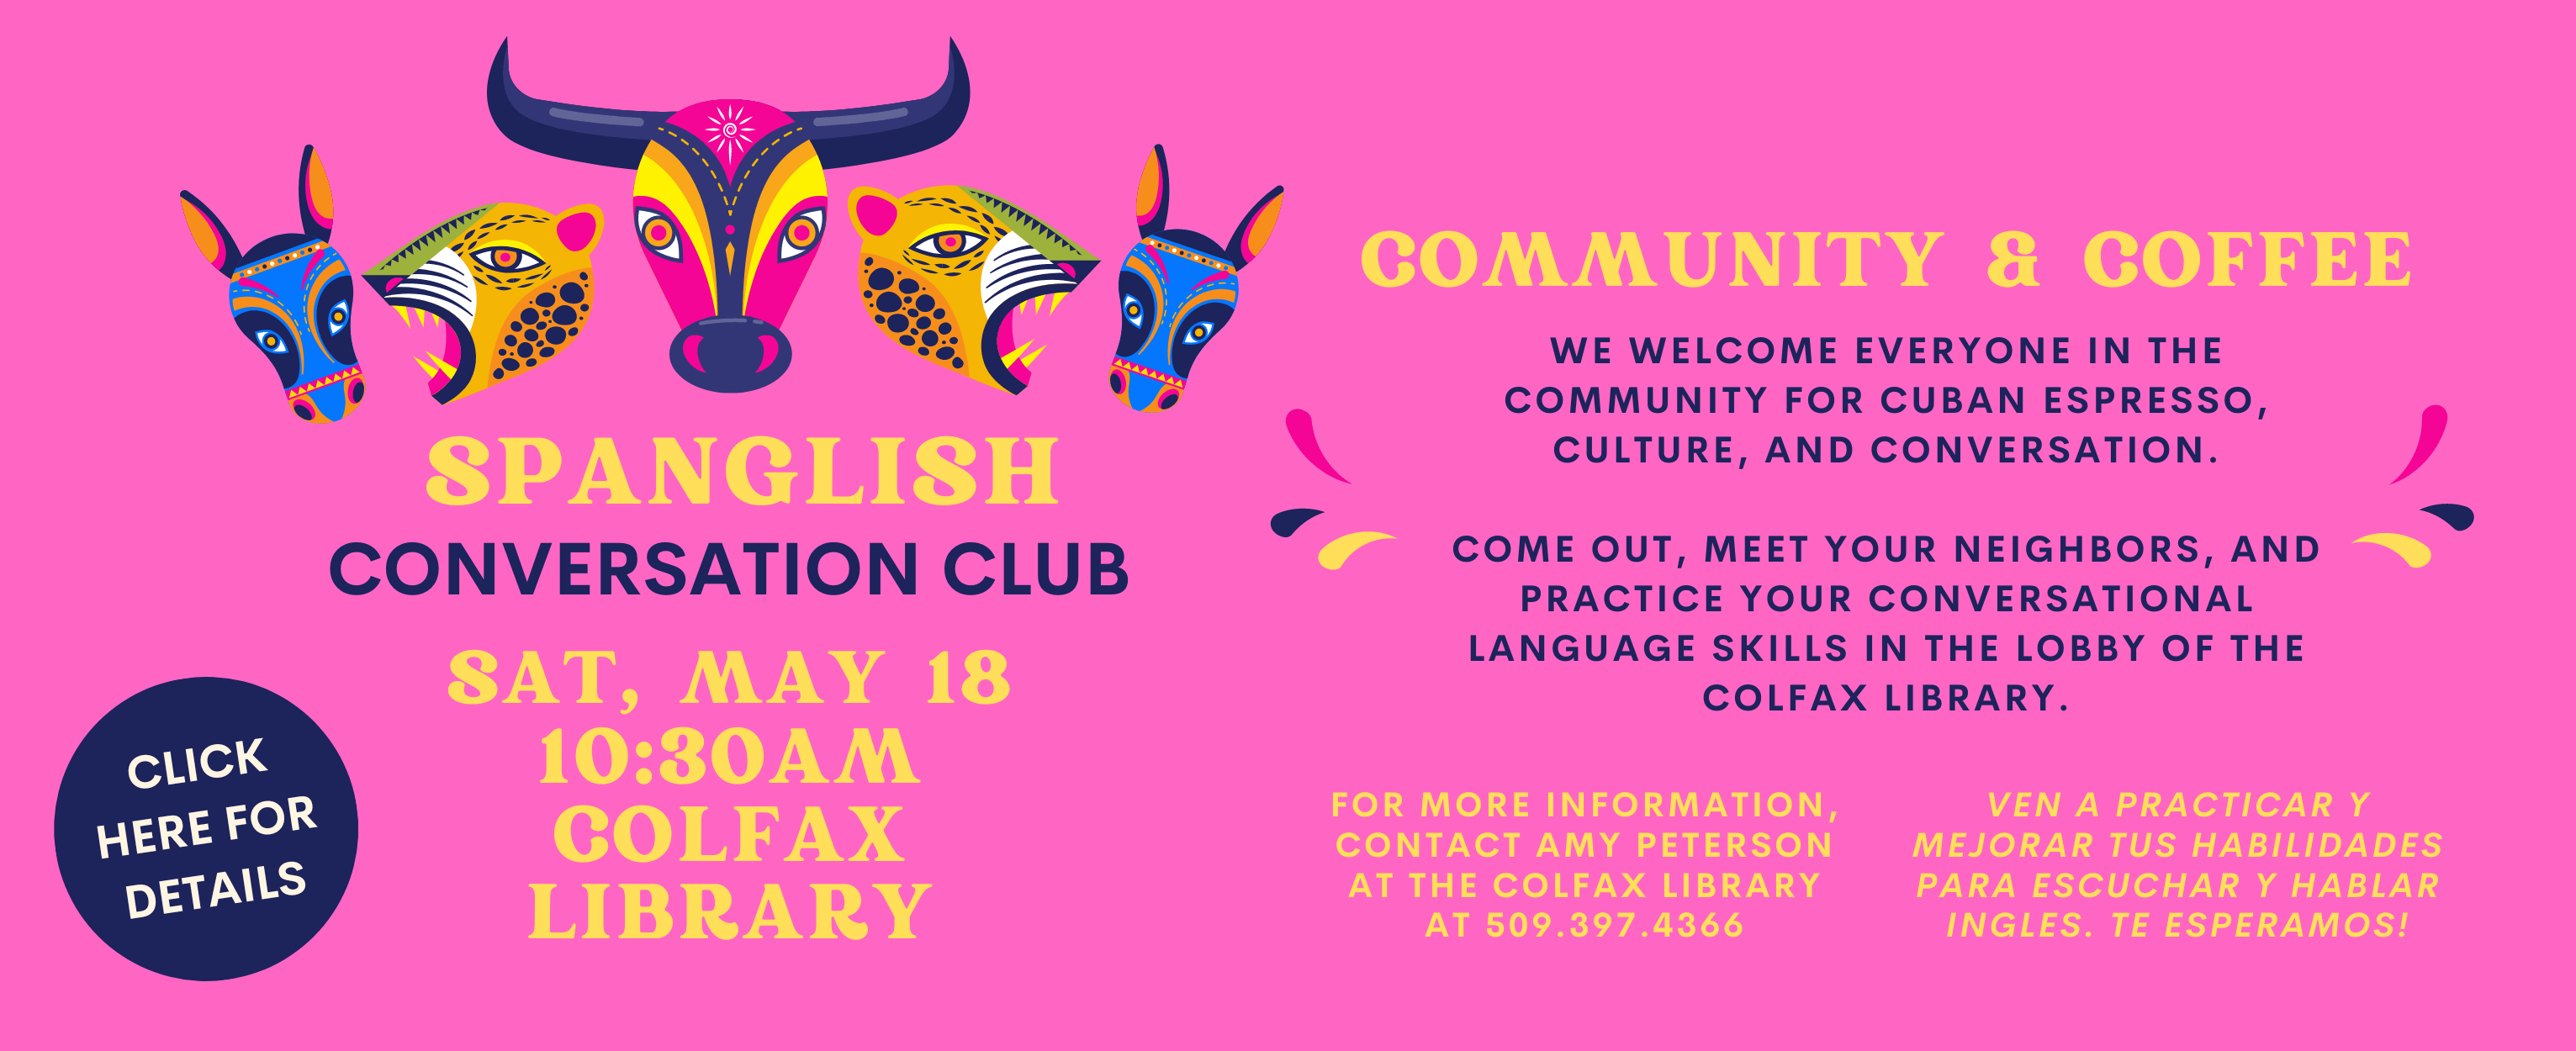 Celebrate diversity & practice your conversational Spanish and/or English, while immersing yourself in other cultures through food and conversation in a relaxed environment. Saturday, May 18 at 10:30 AM at the Colfax Library. Click here for details.